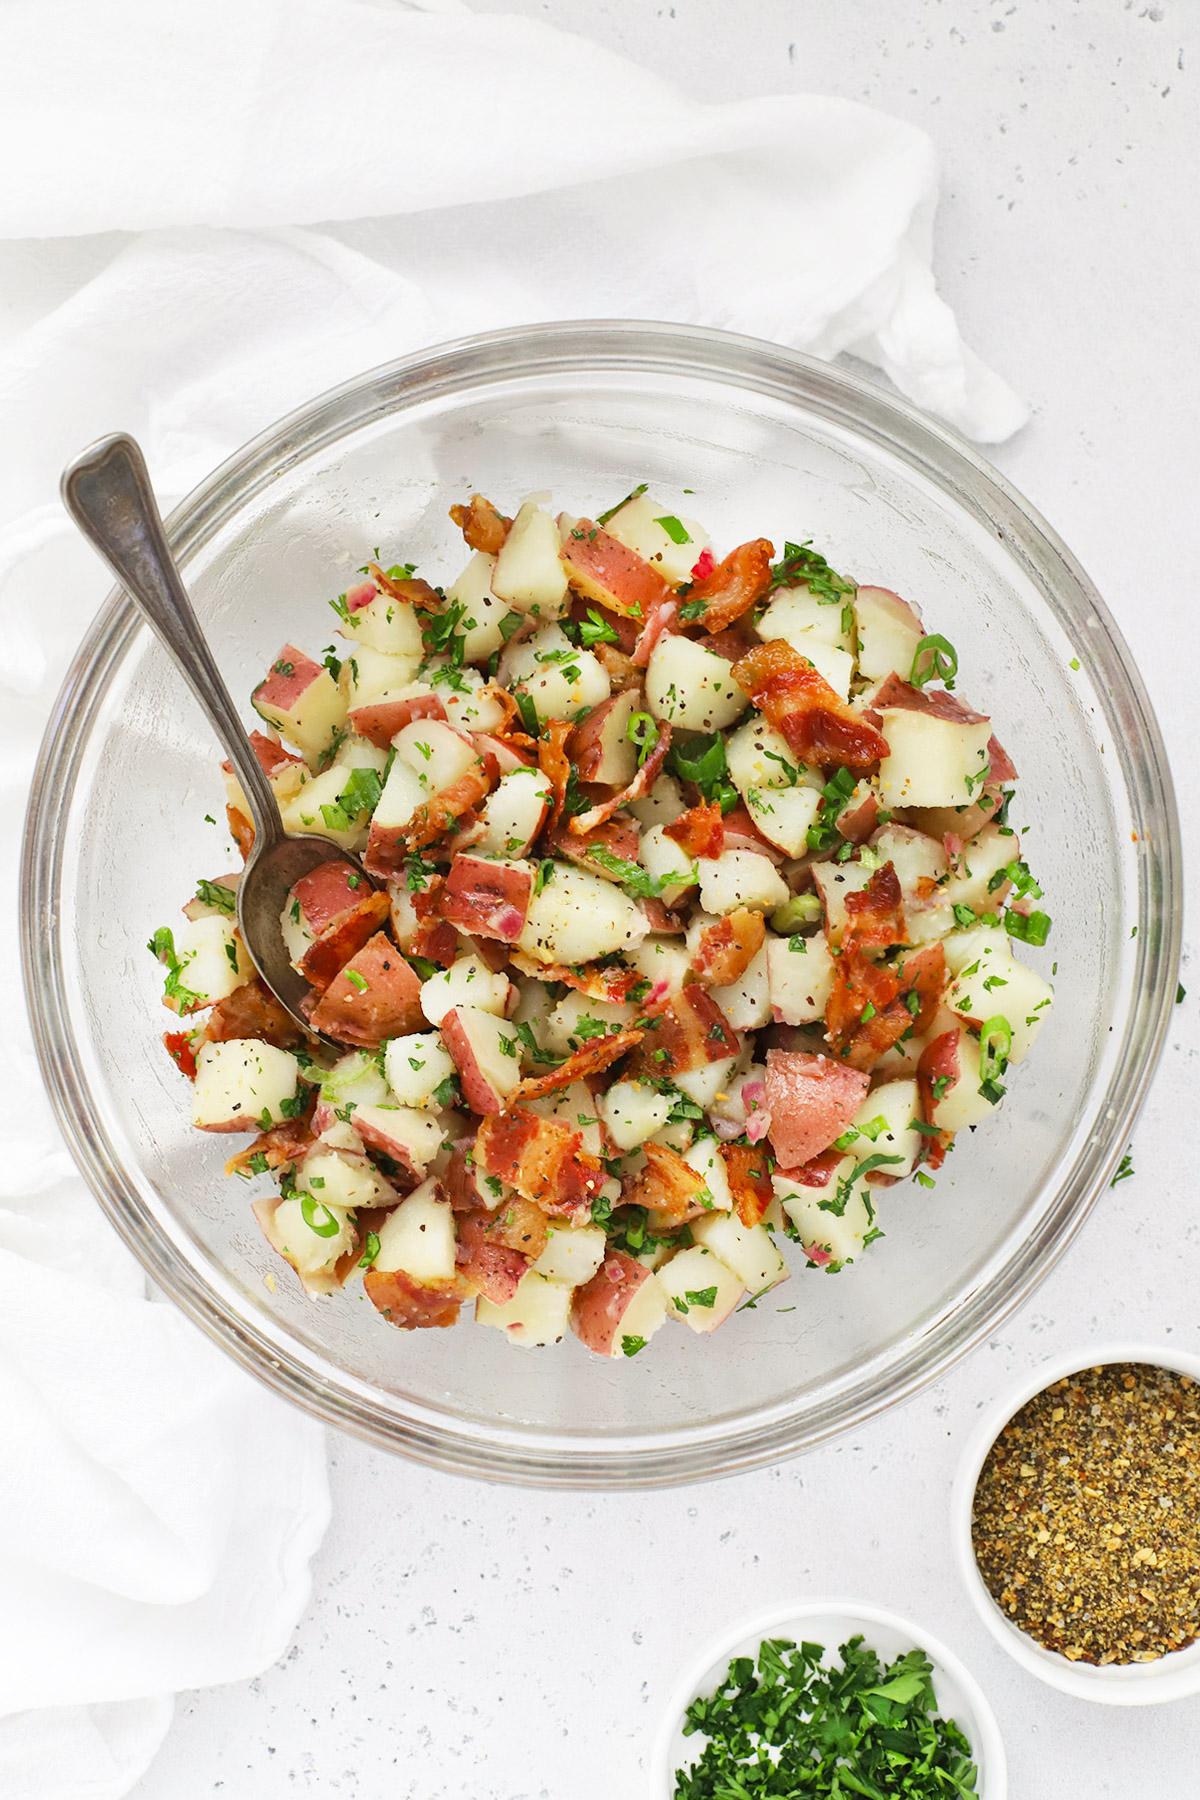 Overhead view of a glass bowl of German Potato Salad with Bacon Dressing